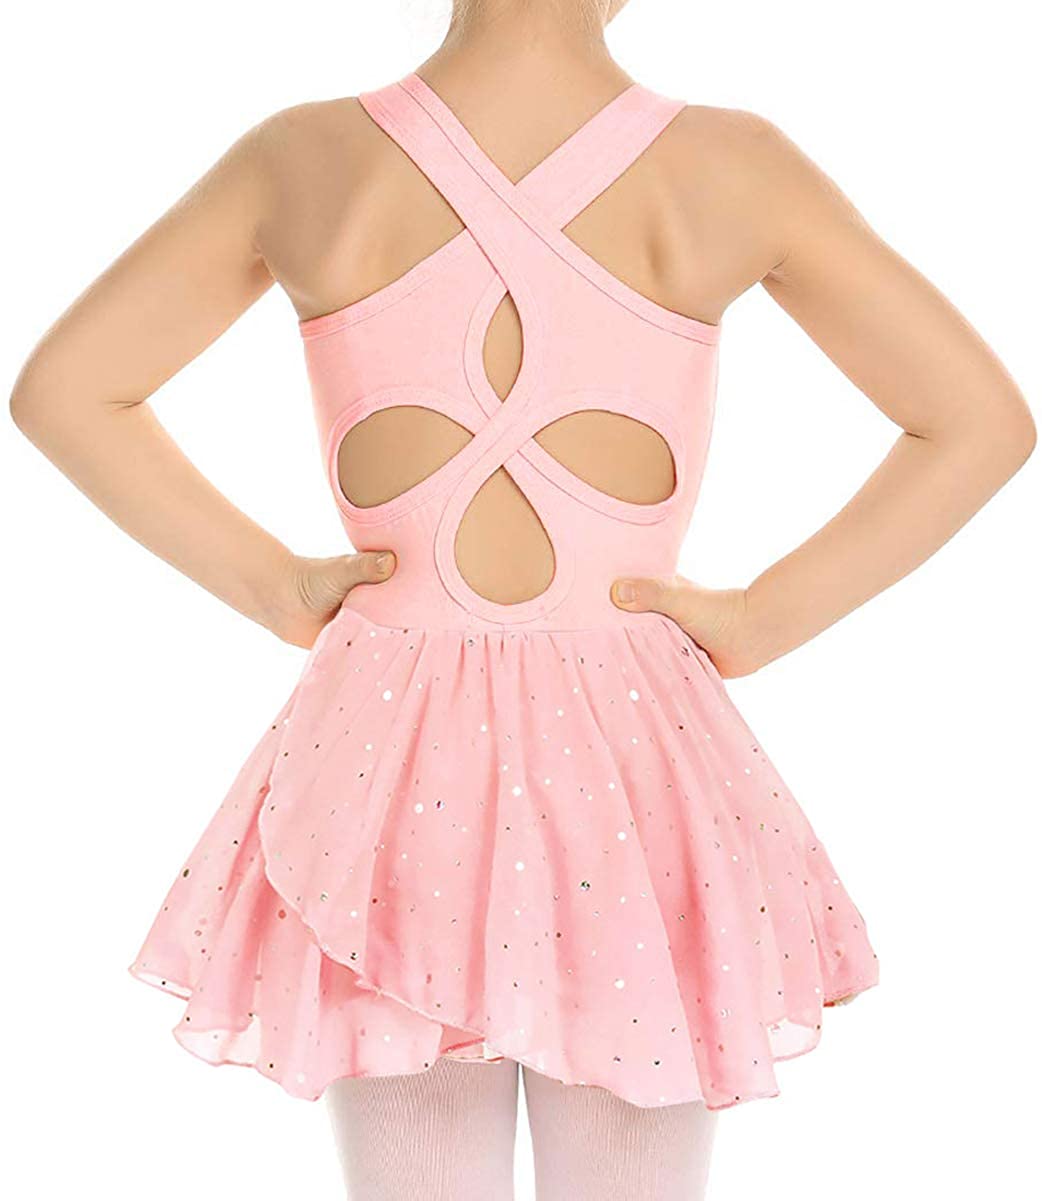 Move Dance Girls Ballet Dance Dress with Hollow Back Sparkle Tutu Skirted Leotard for 3-9 Years 